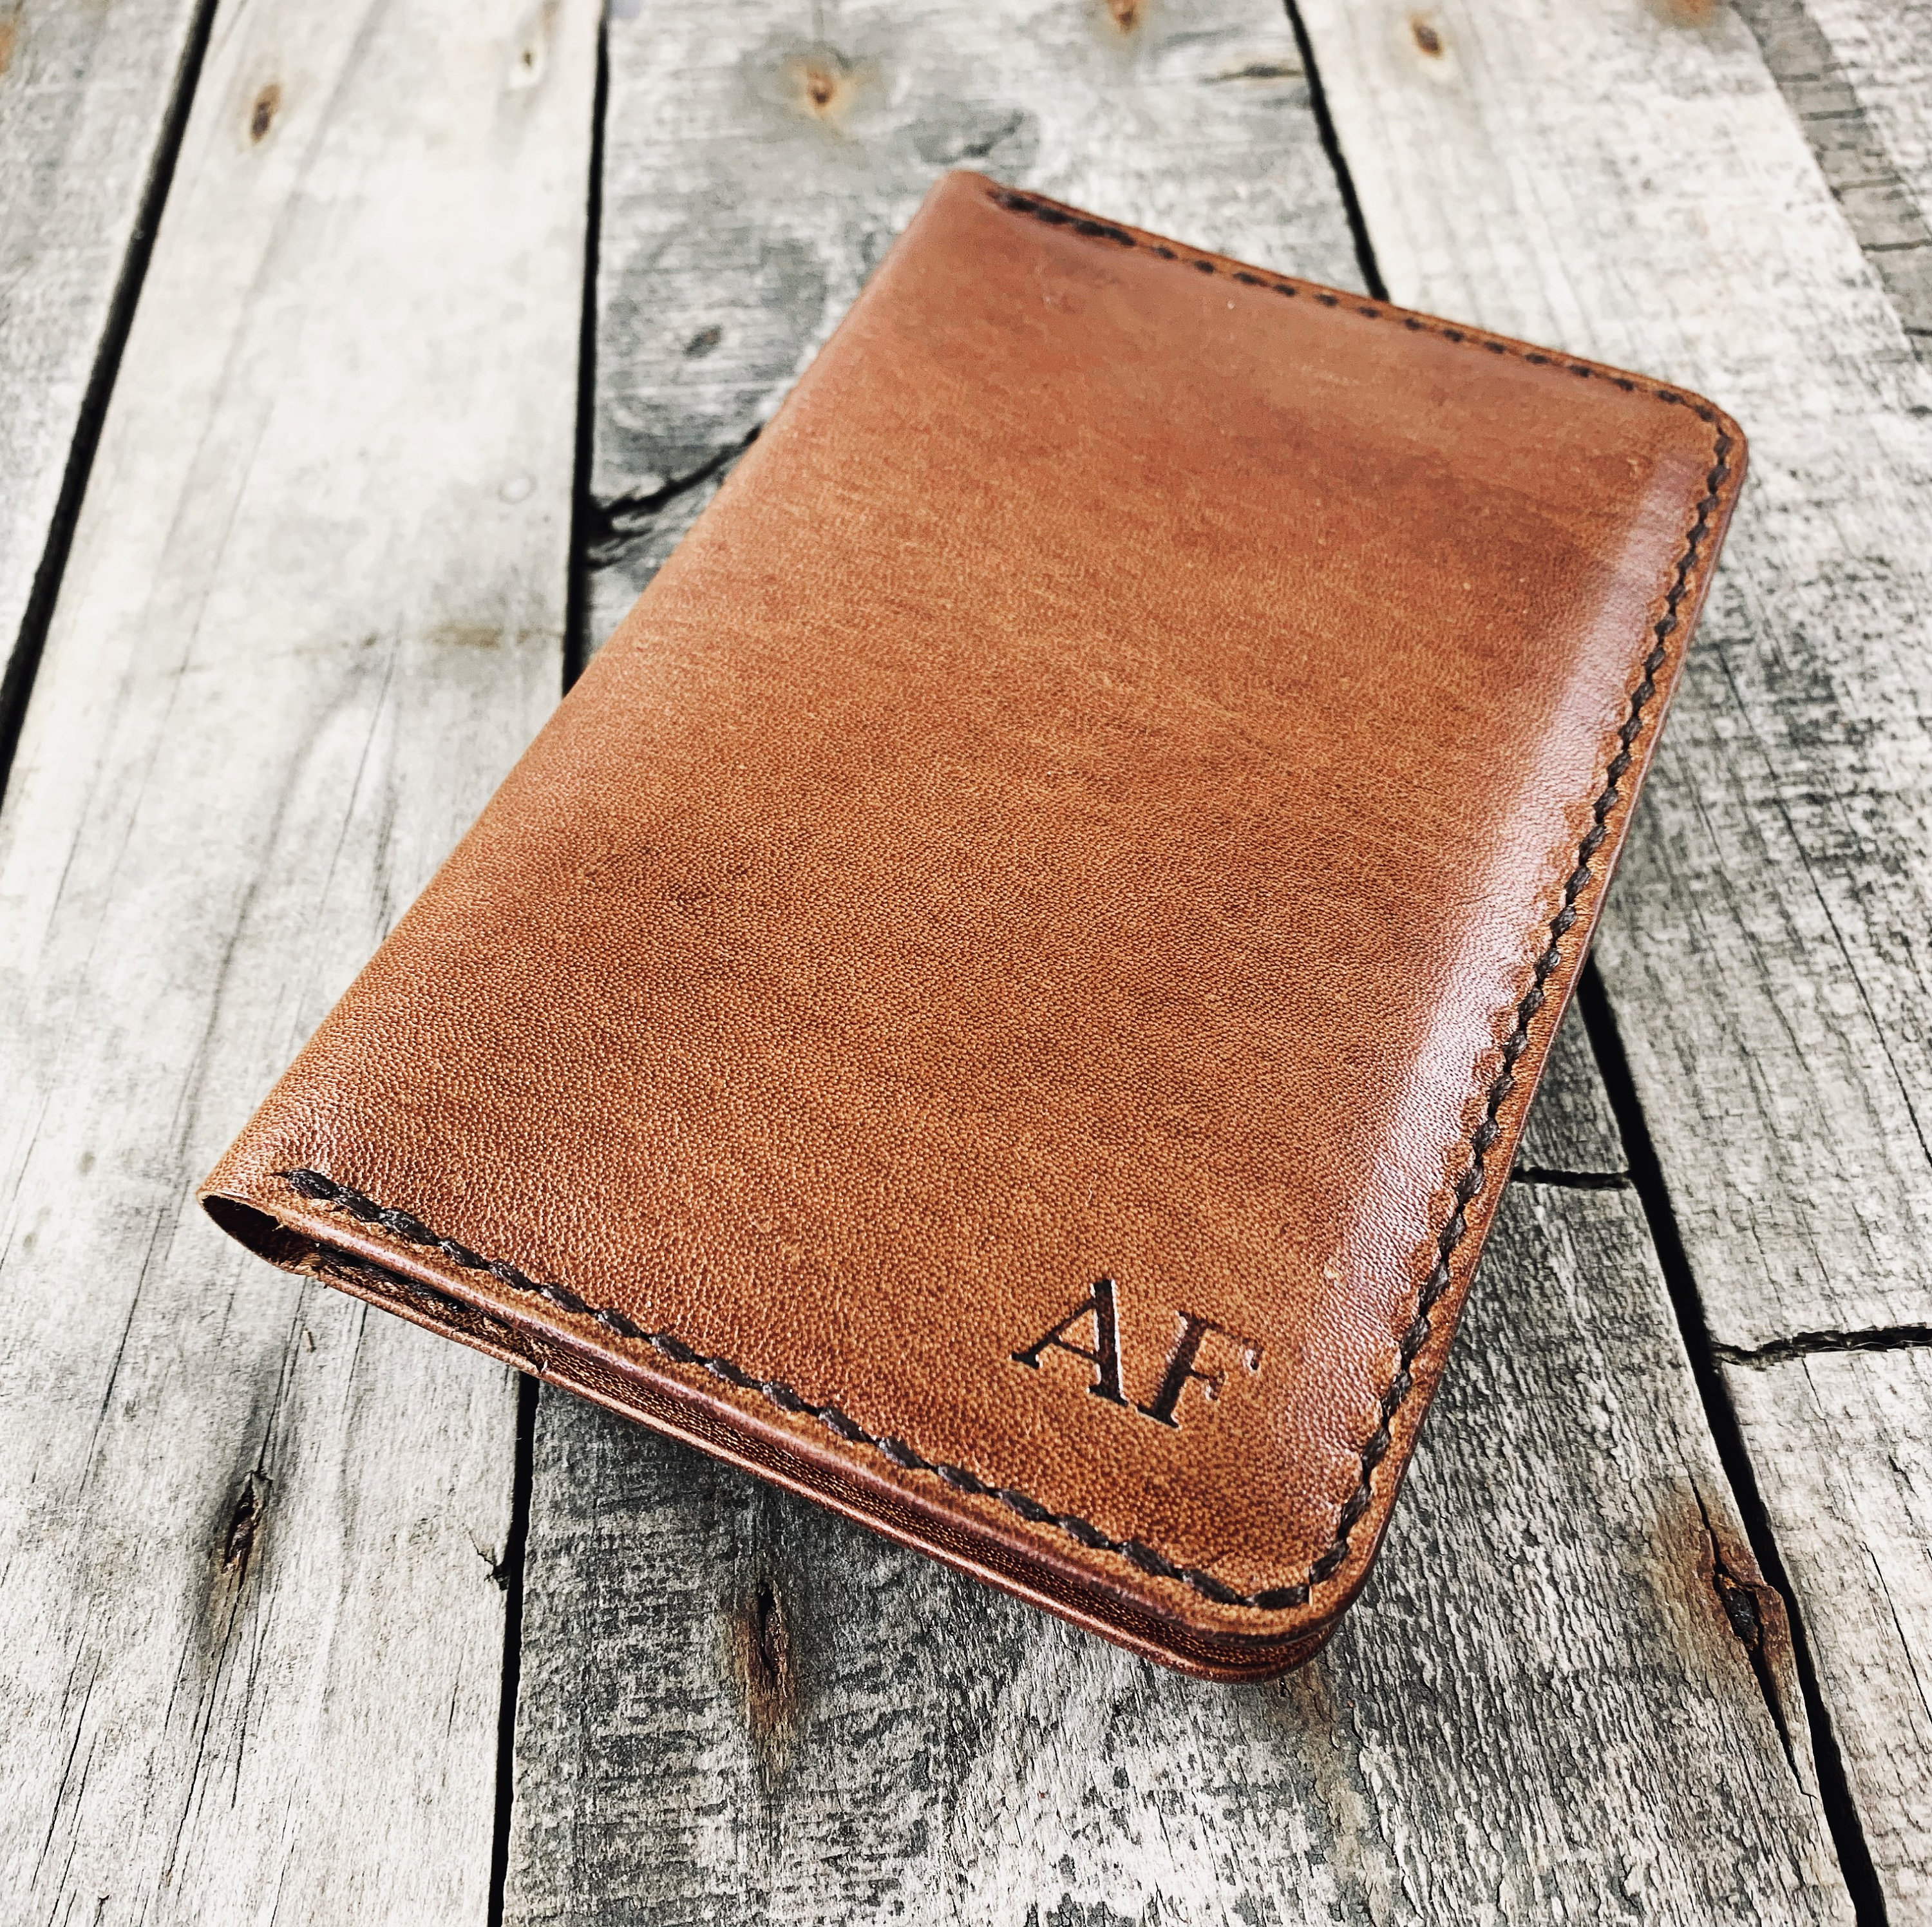 Woven Passport Wallet, Natural Vegetable Tanned Leather